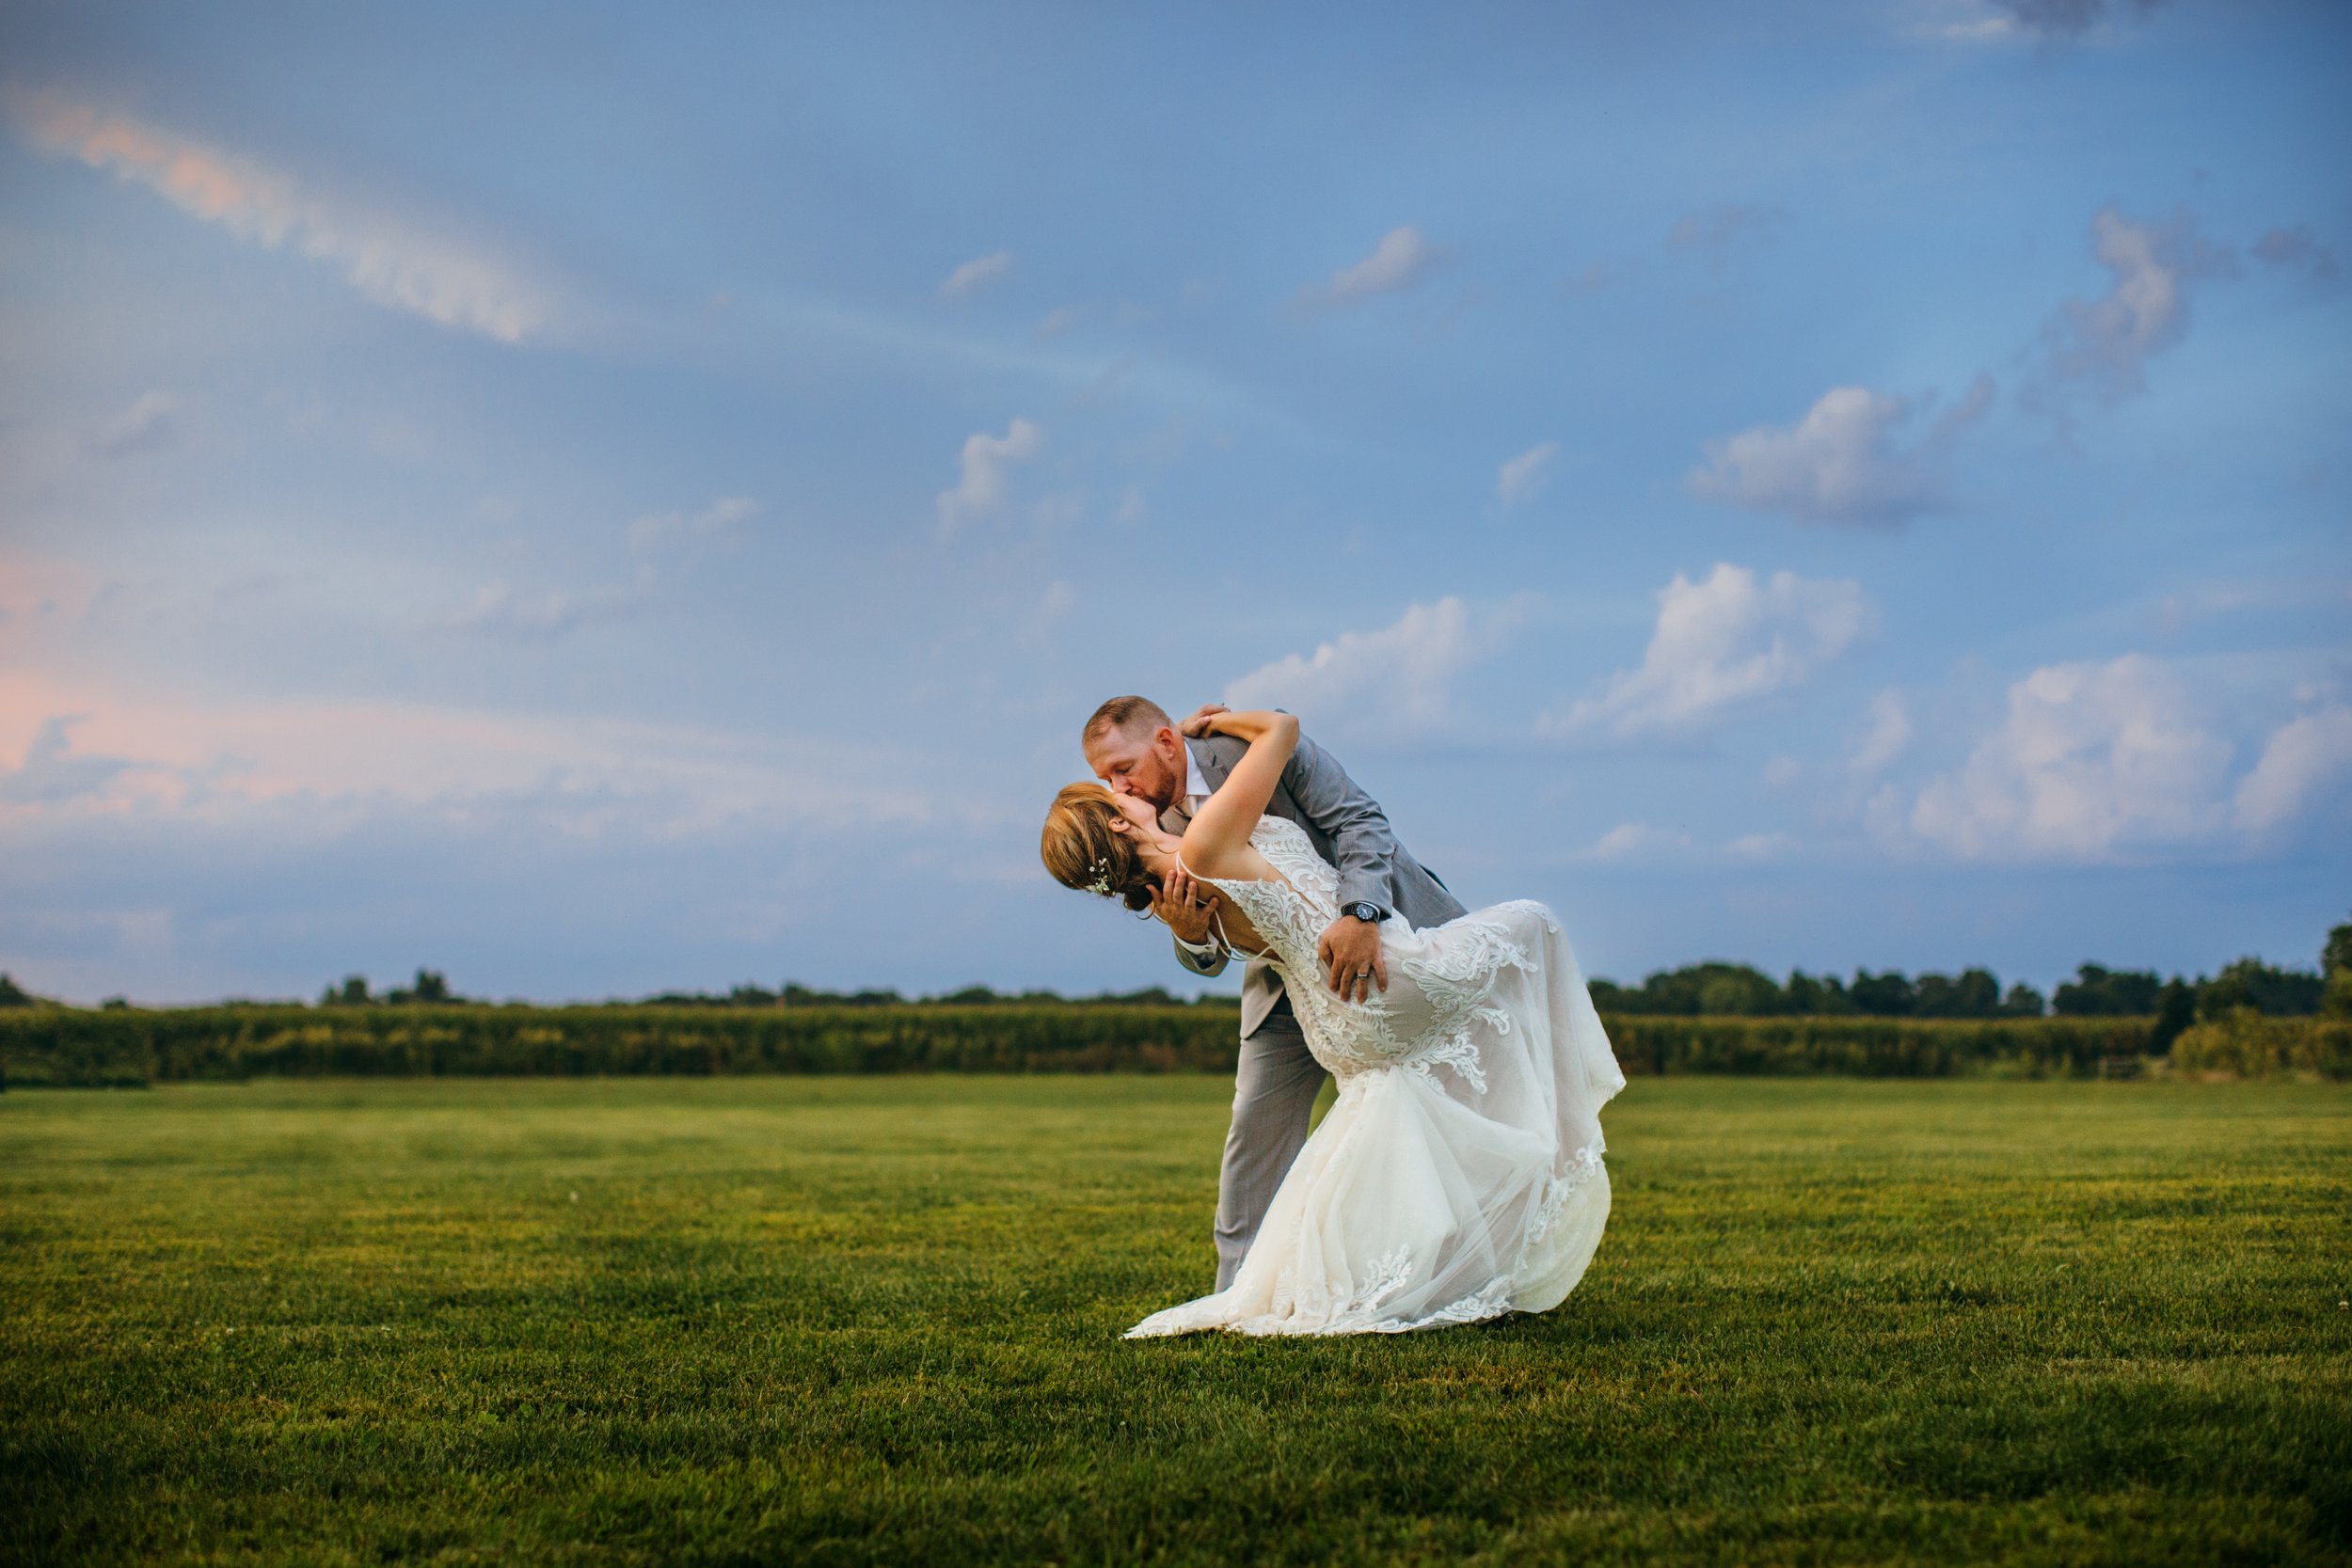  The groom dips the bride and kisses her in a green valley with blue skies by Teala Ward Photography. country wedding kissing #TealaWardPhotography #IllinoisValleyPhotographer #summerwedding #TealaWardWeddings #Illinoisweddings  